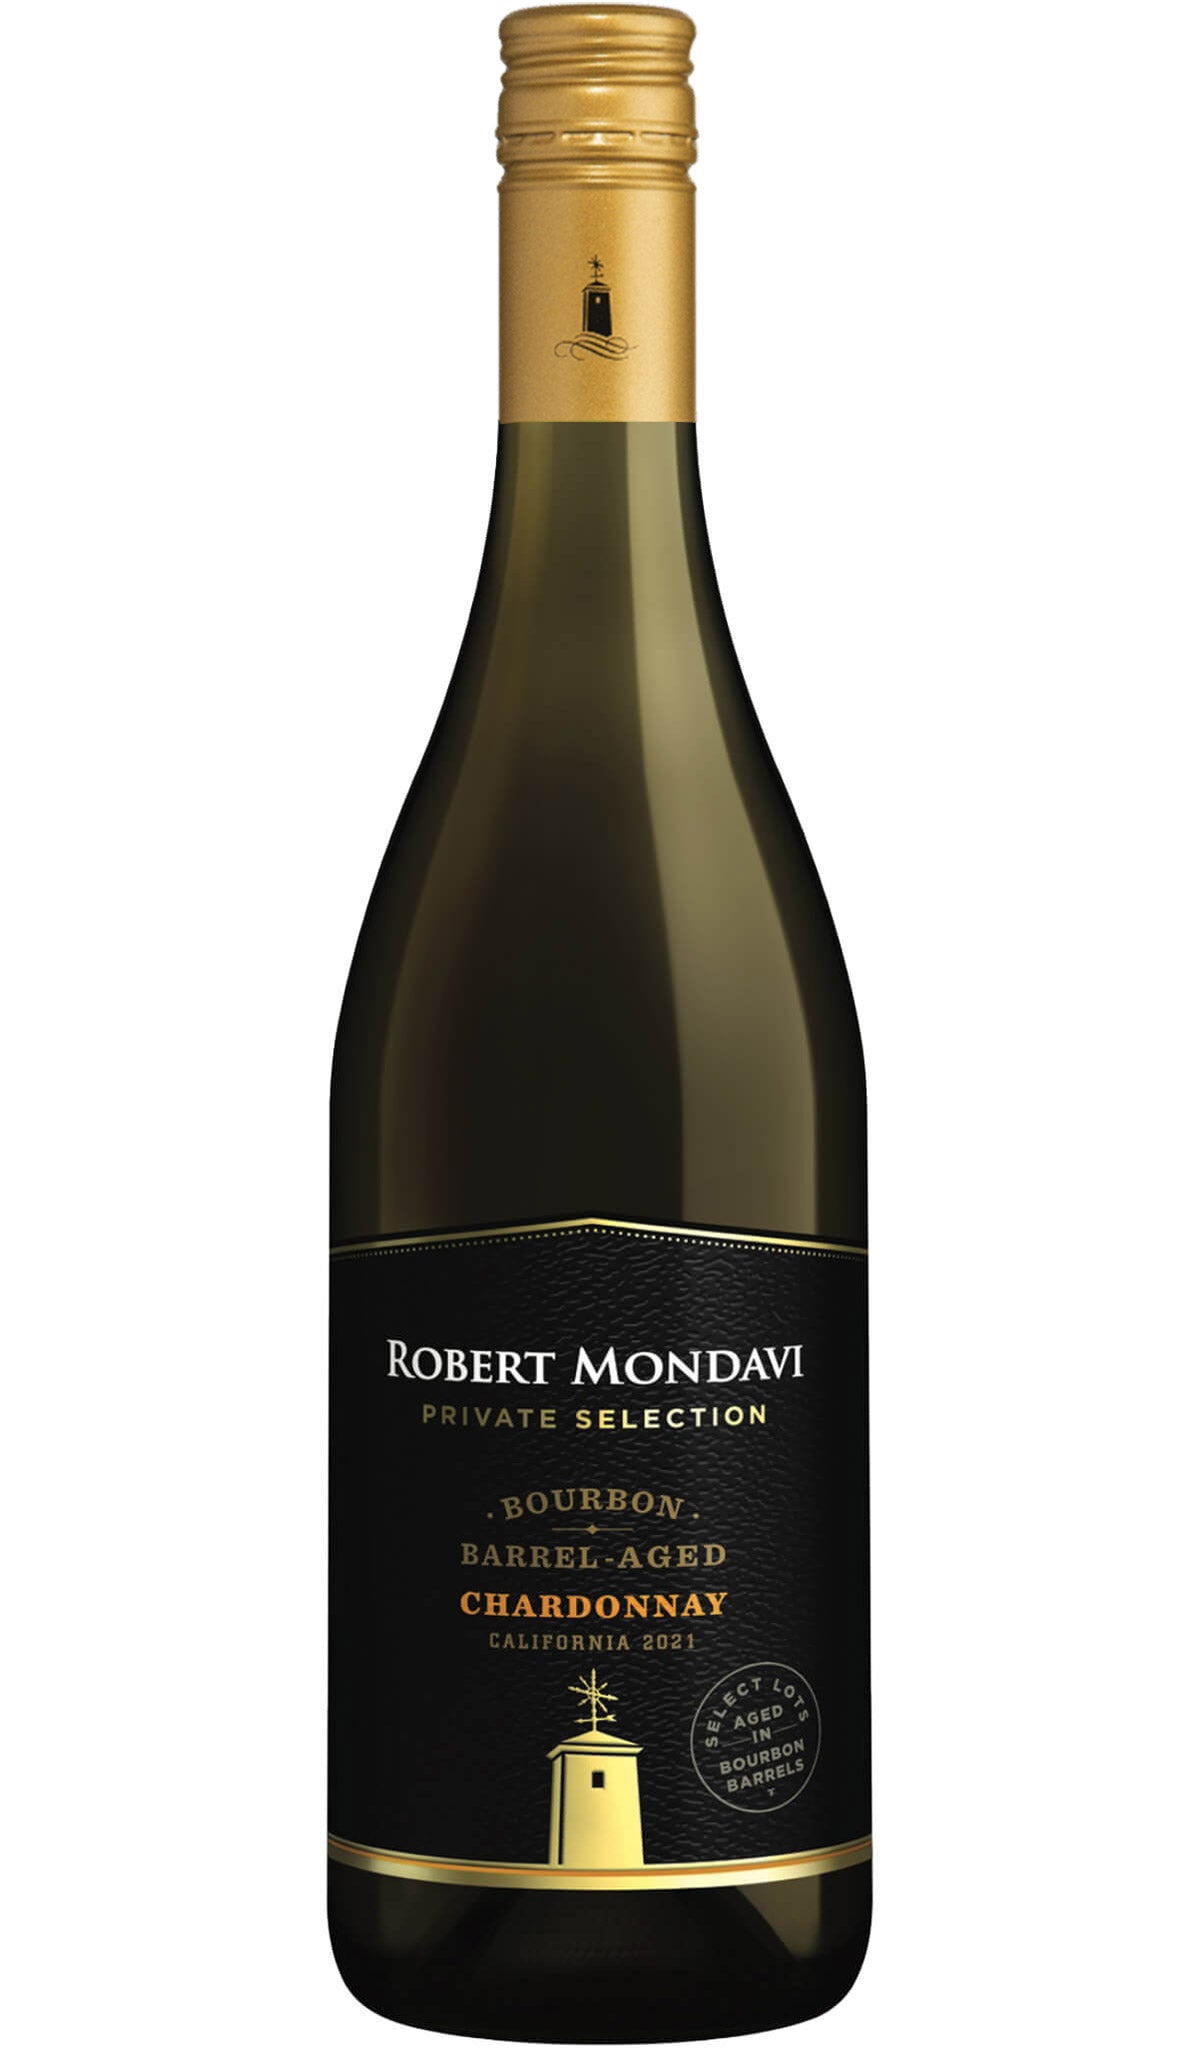 Find out more, explore the range and buy Robert Mondavi Bourbon Barrel Aged Chardonnay 2021 (California, USA) available online at Wine Sellers Direct - Australia's independent liquor specialists.